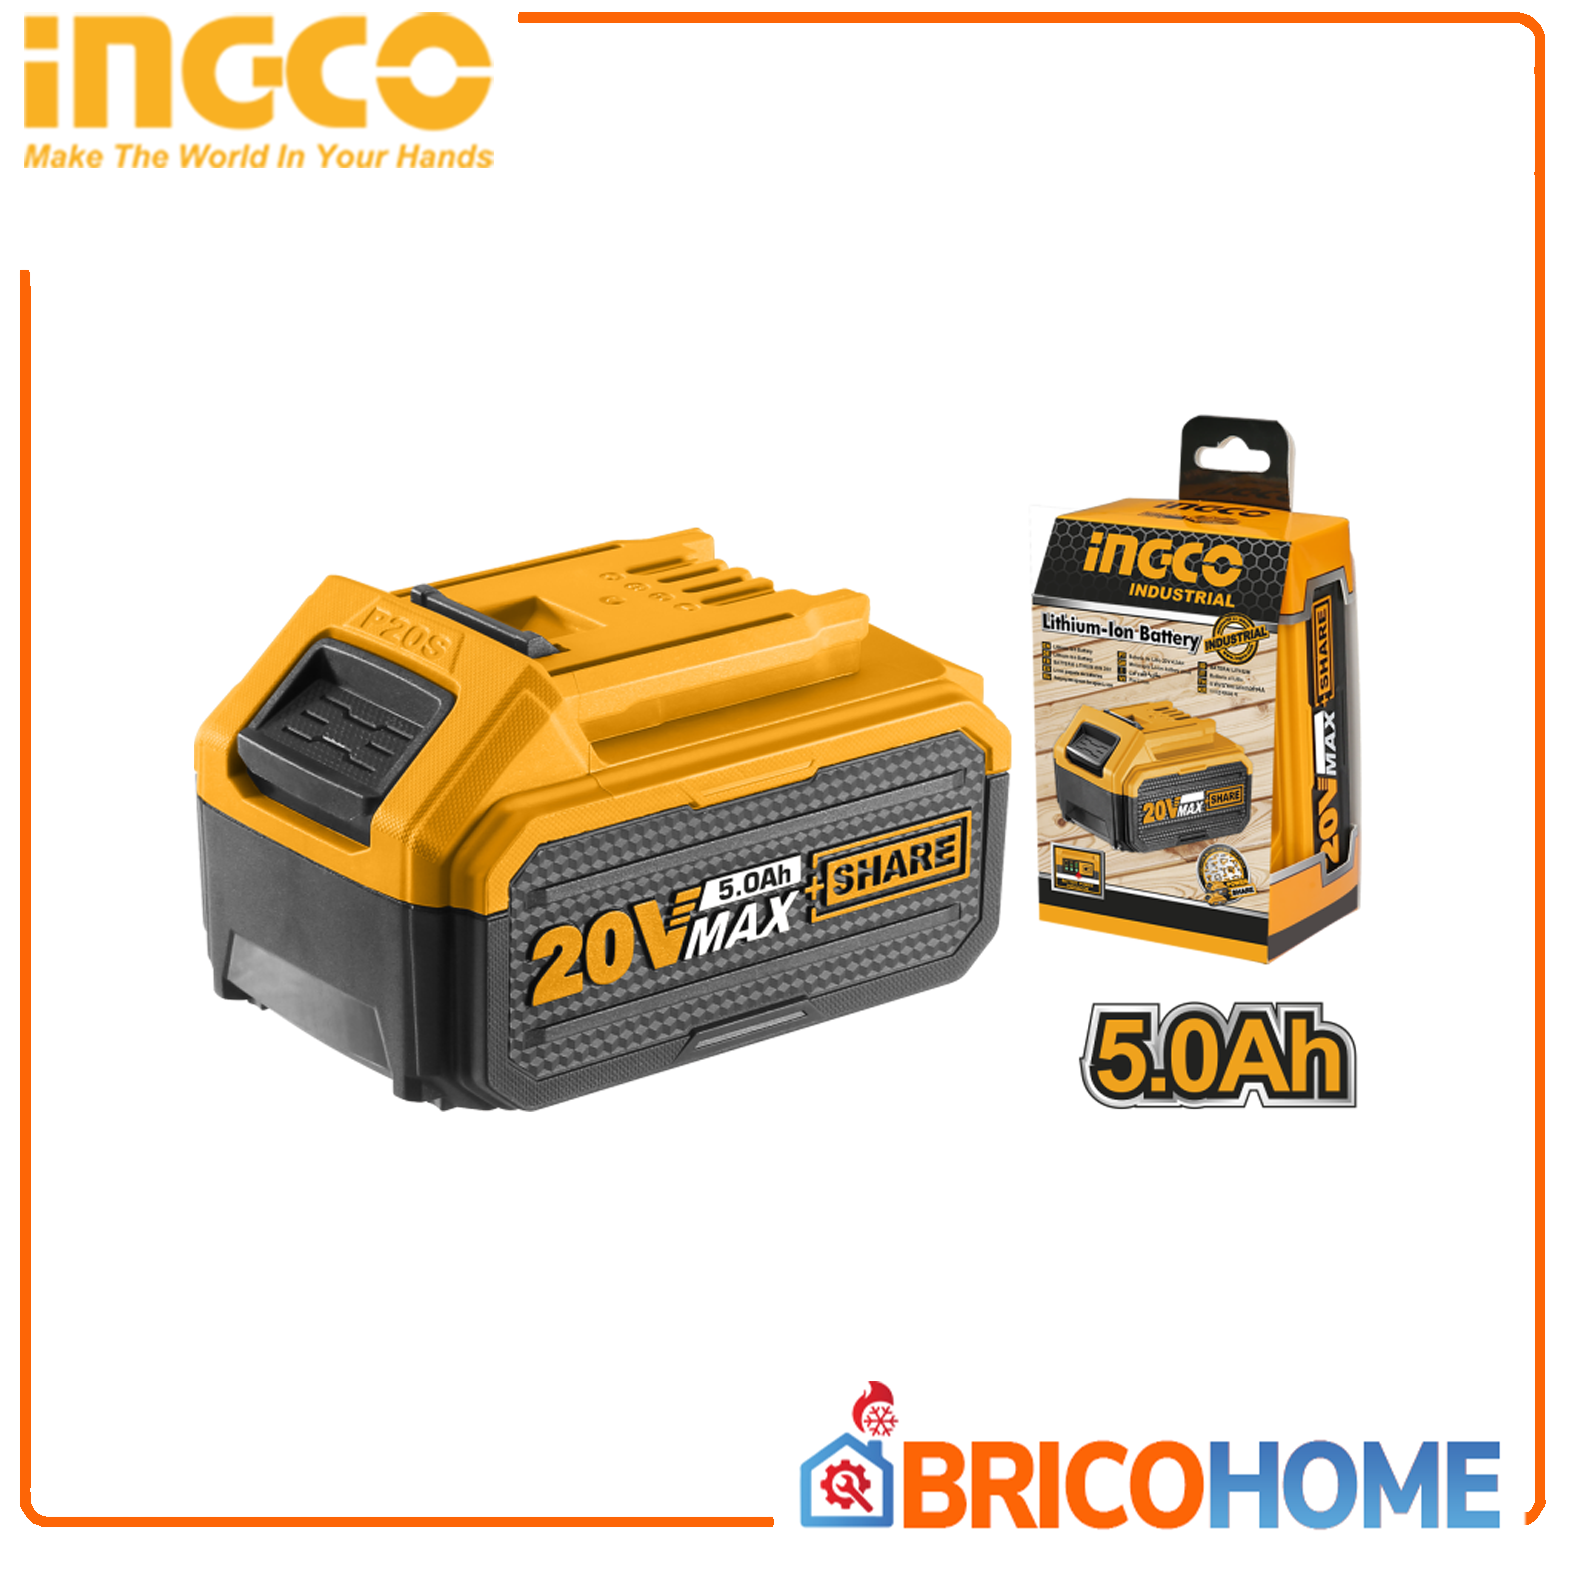 INGCO 20V 5.0Ah Lithium-ion battery